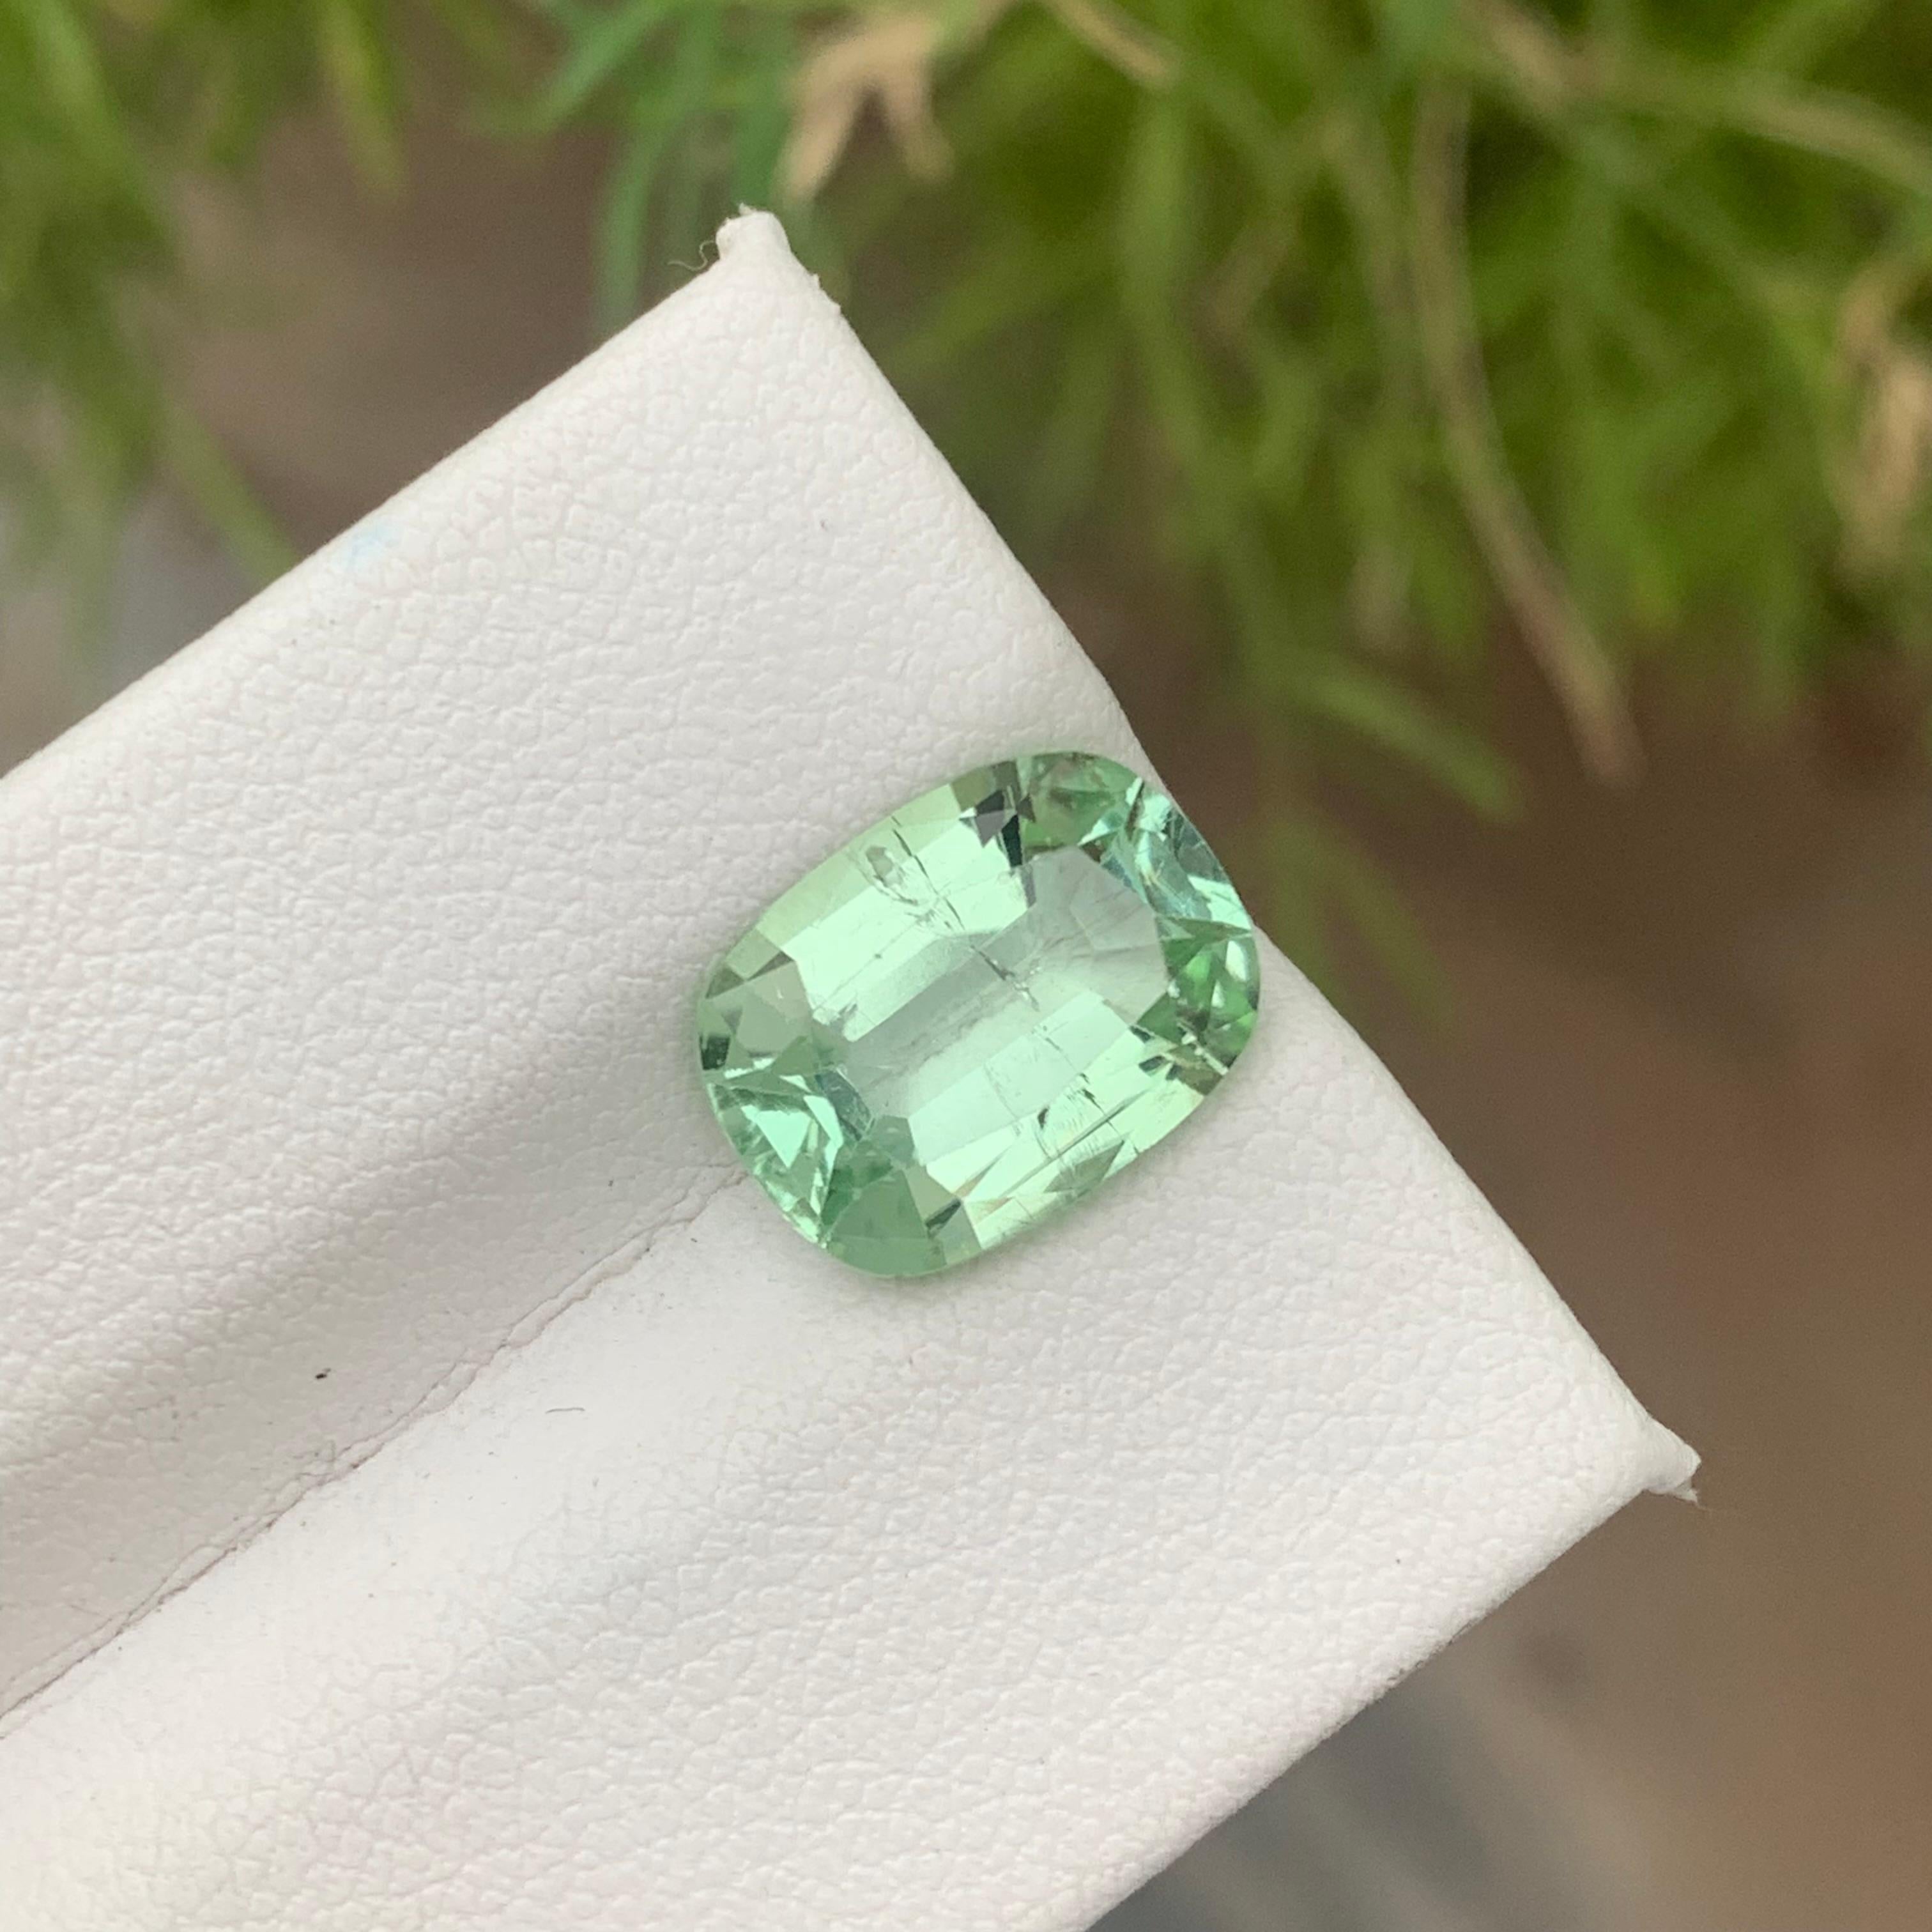 Cushion Cut 4.50 Carat Natural Faceted Mint Green Tourmaline October Birthstone For Sale